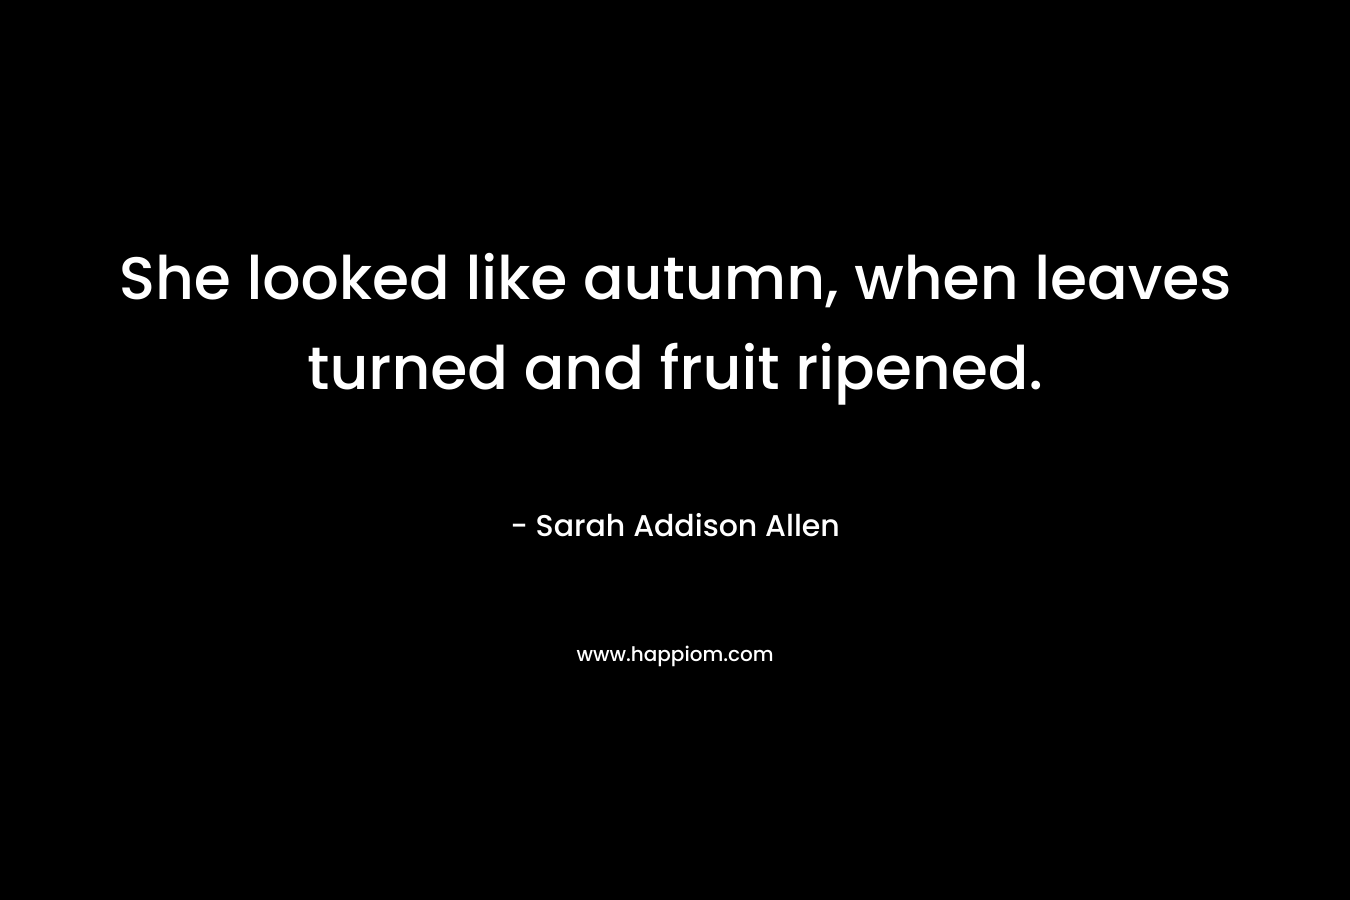 She looked like autumn, when leaves turned and fruit ripened.